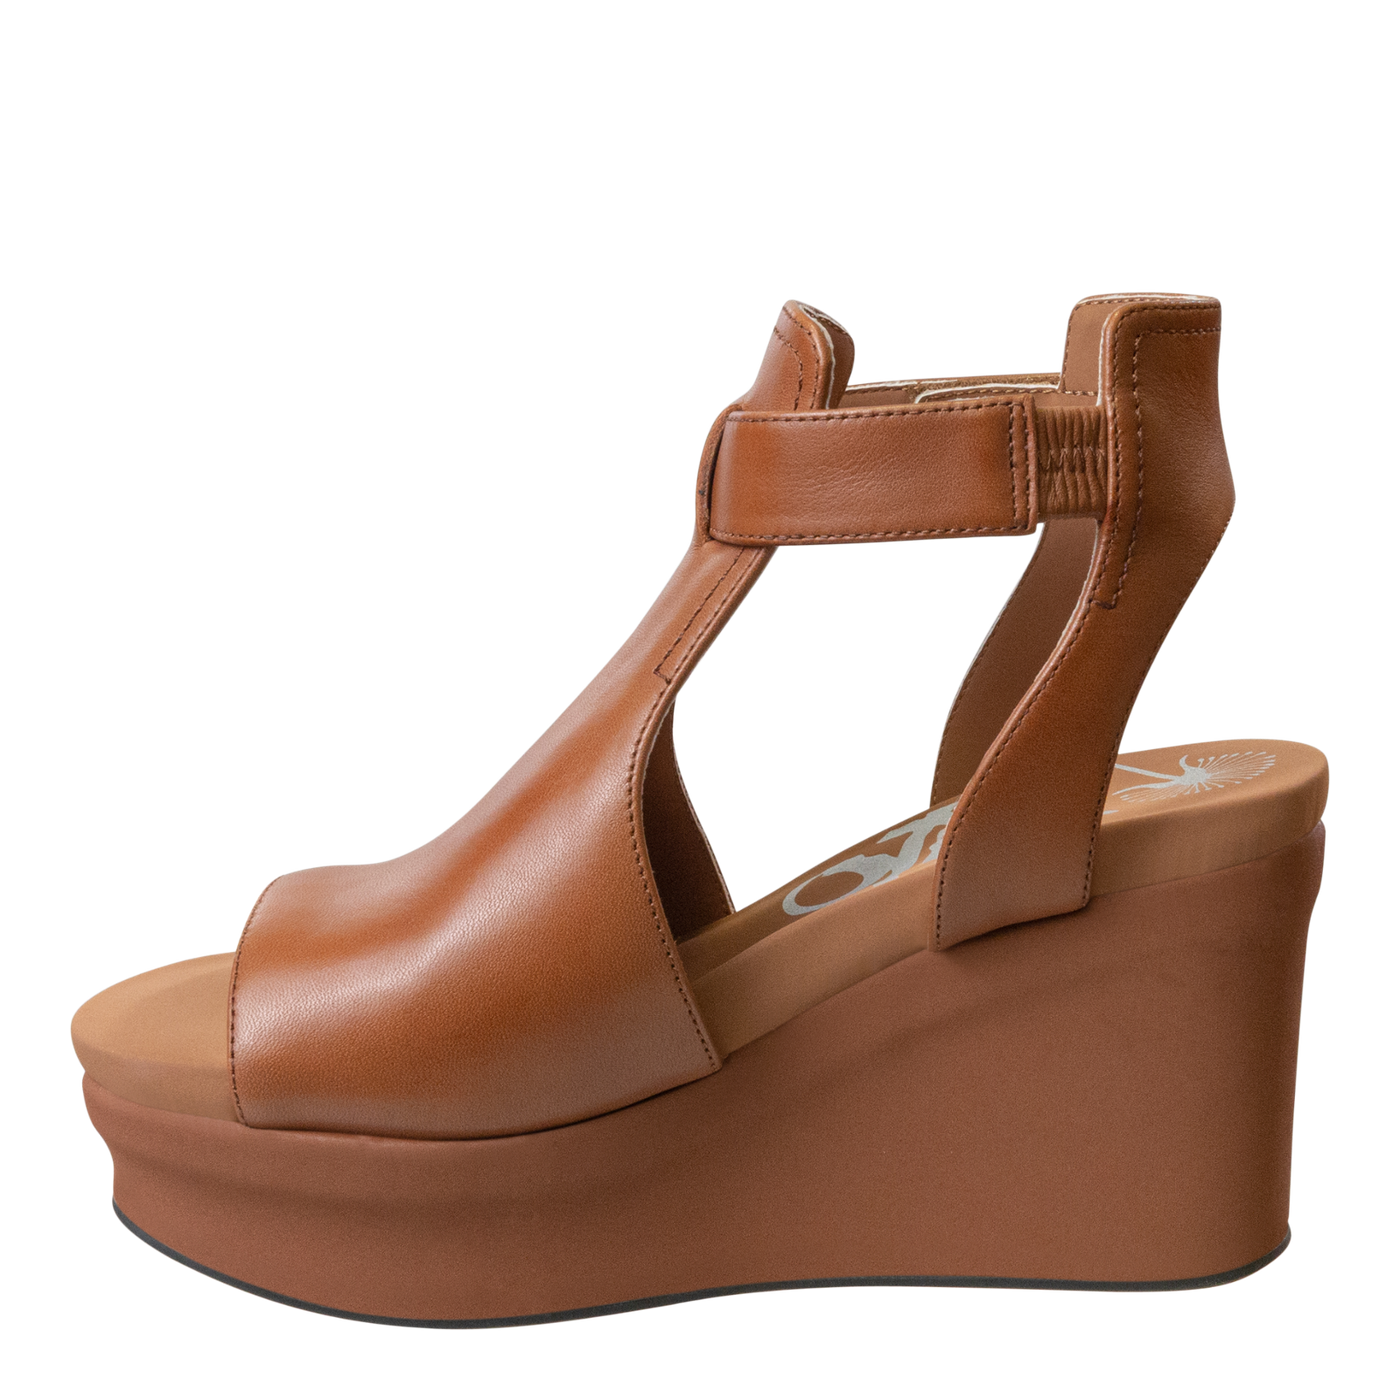 OTBT - MOJO in CAMEL Wedge Sandals